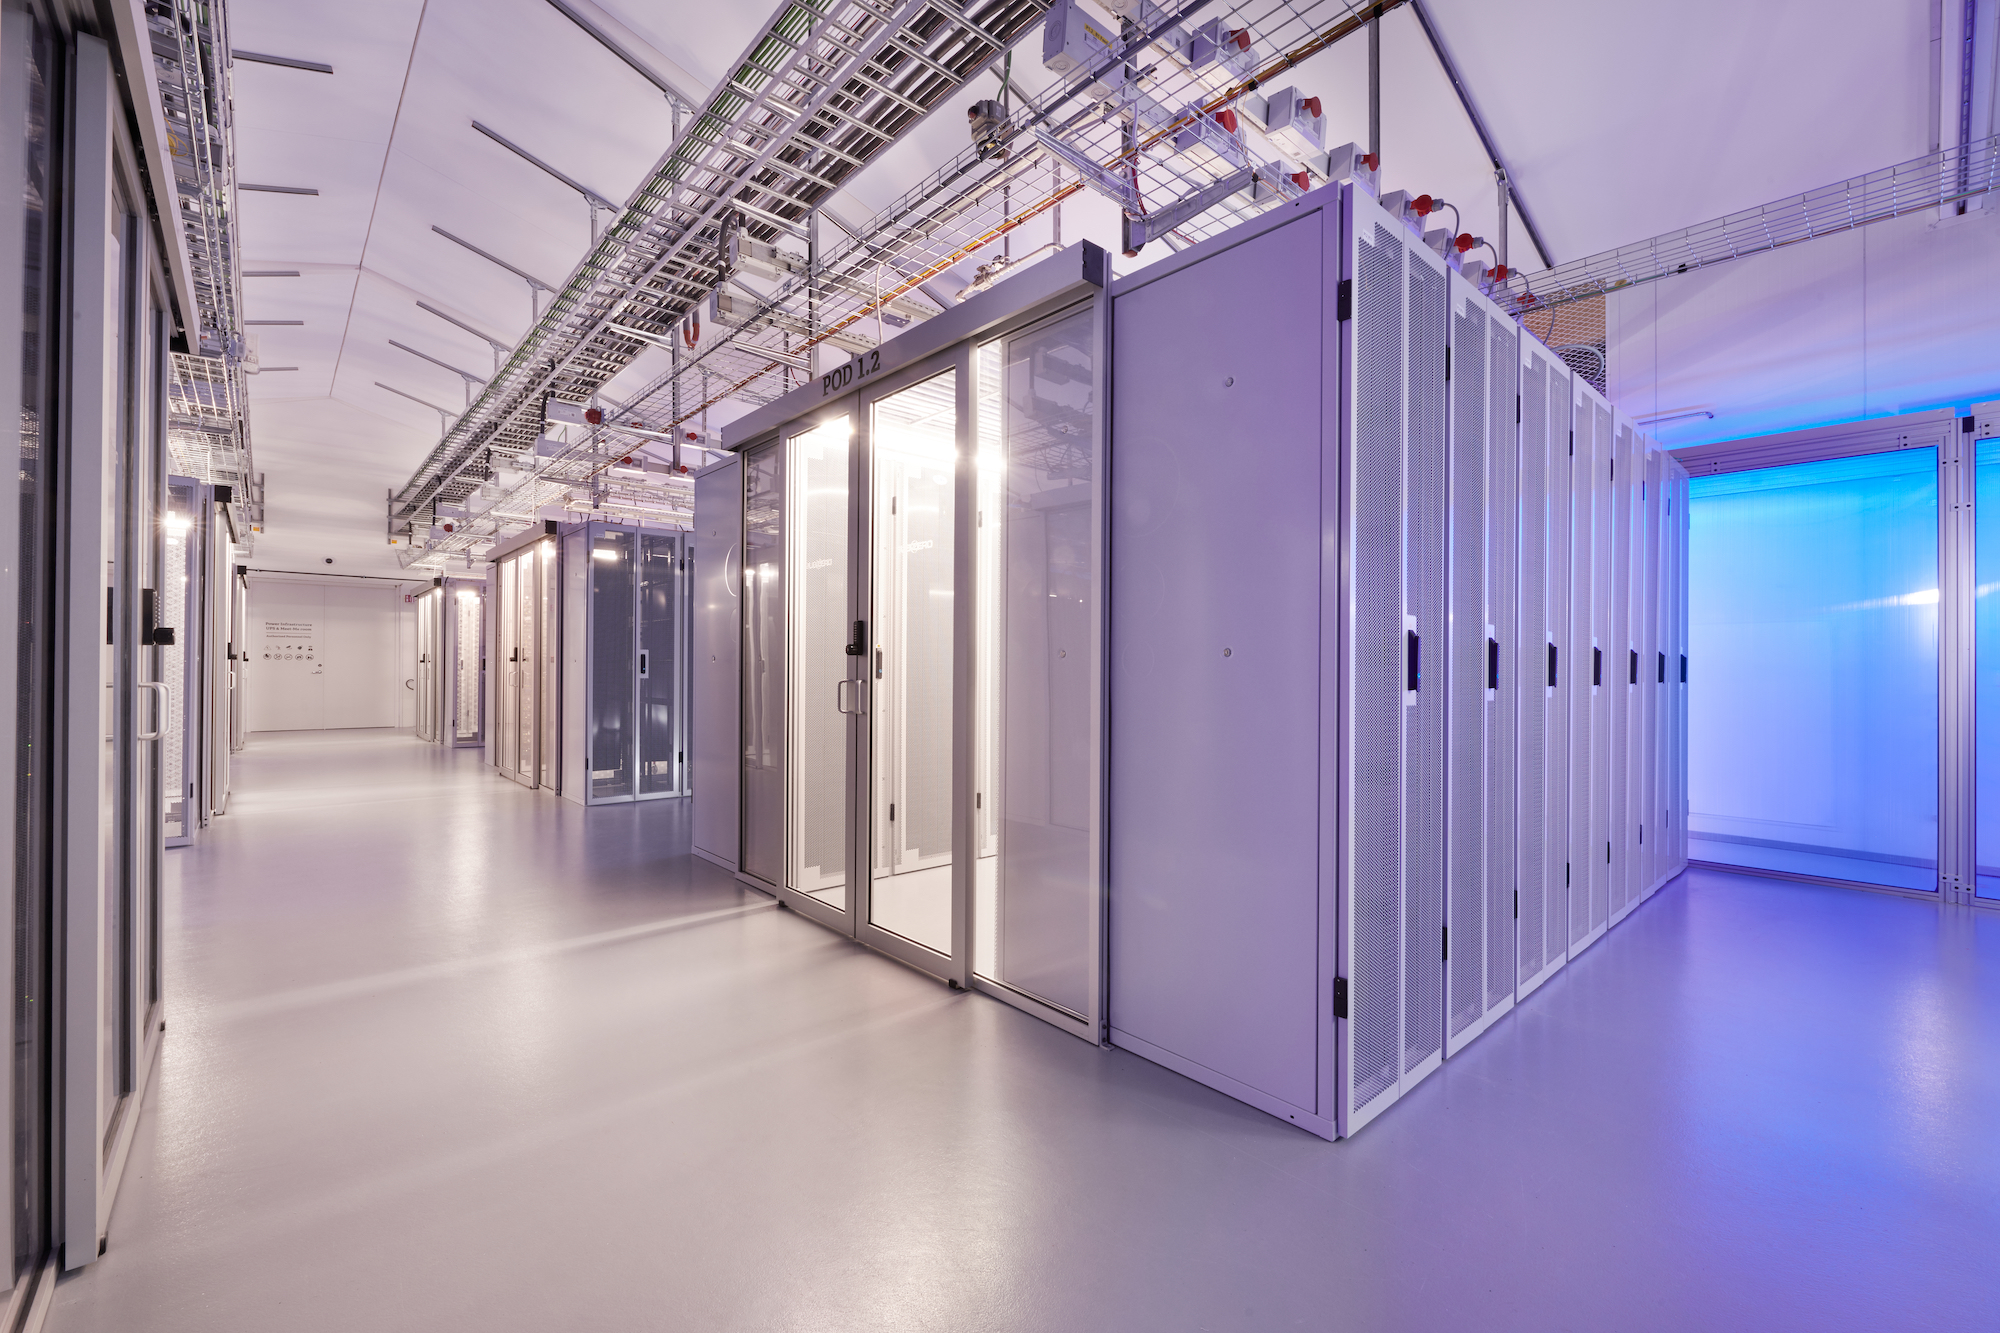 A photo of the ICE02 data center is pictured.